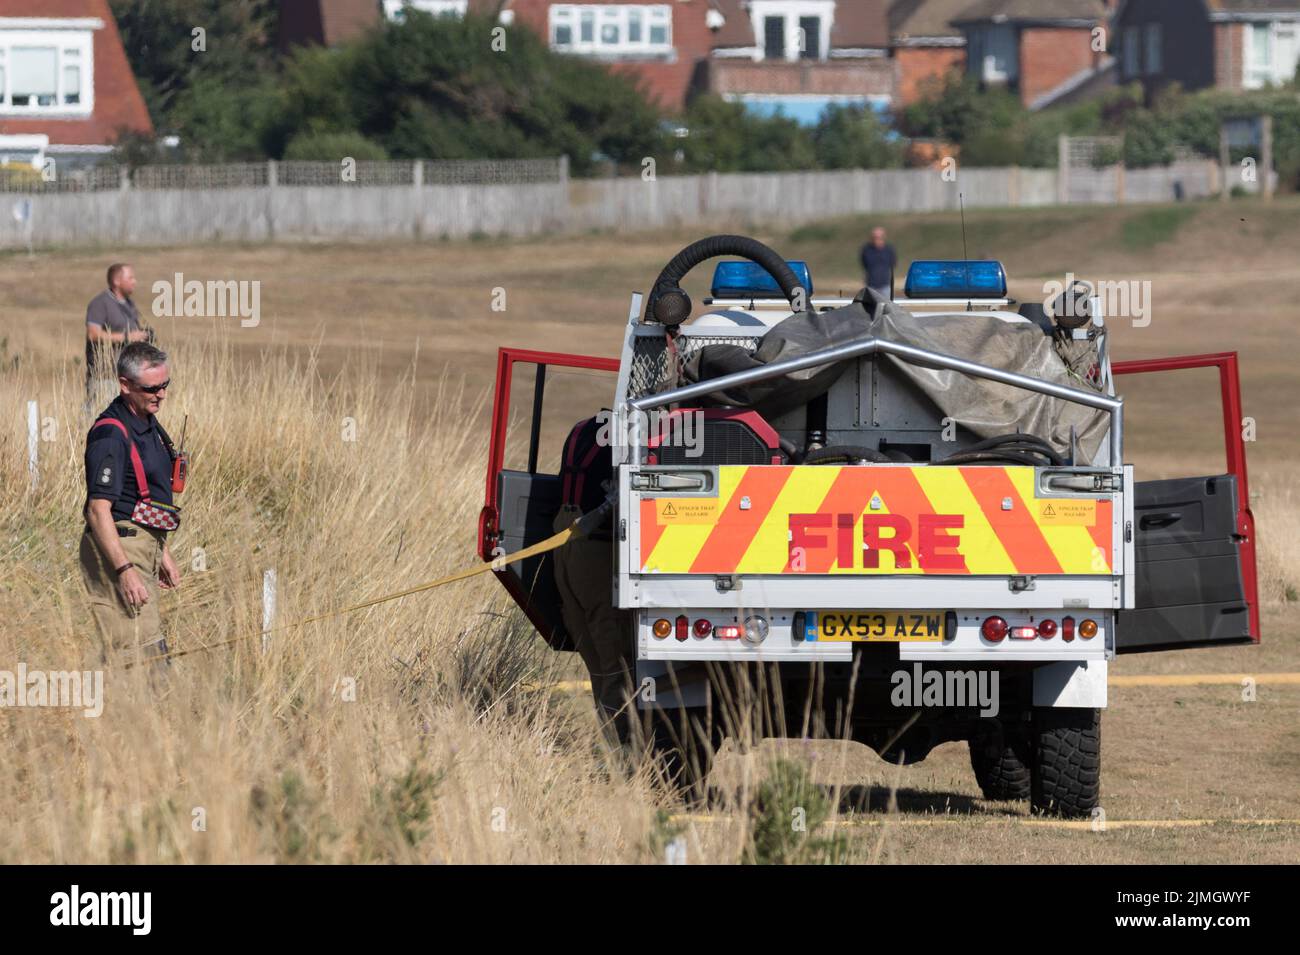 Seaford, East Sussex, UK. th August 2022. Emergency services respond to fire on heathland around the Seaford head golf course, cause currently unknown. Credit: Newspics UK South/Alamy Live News Stock Photo